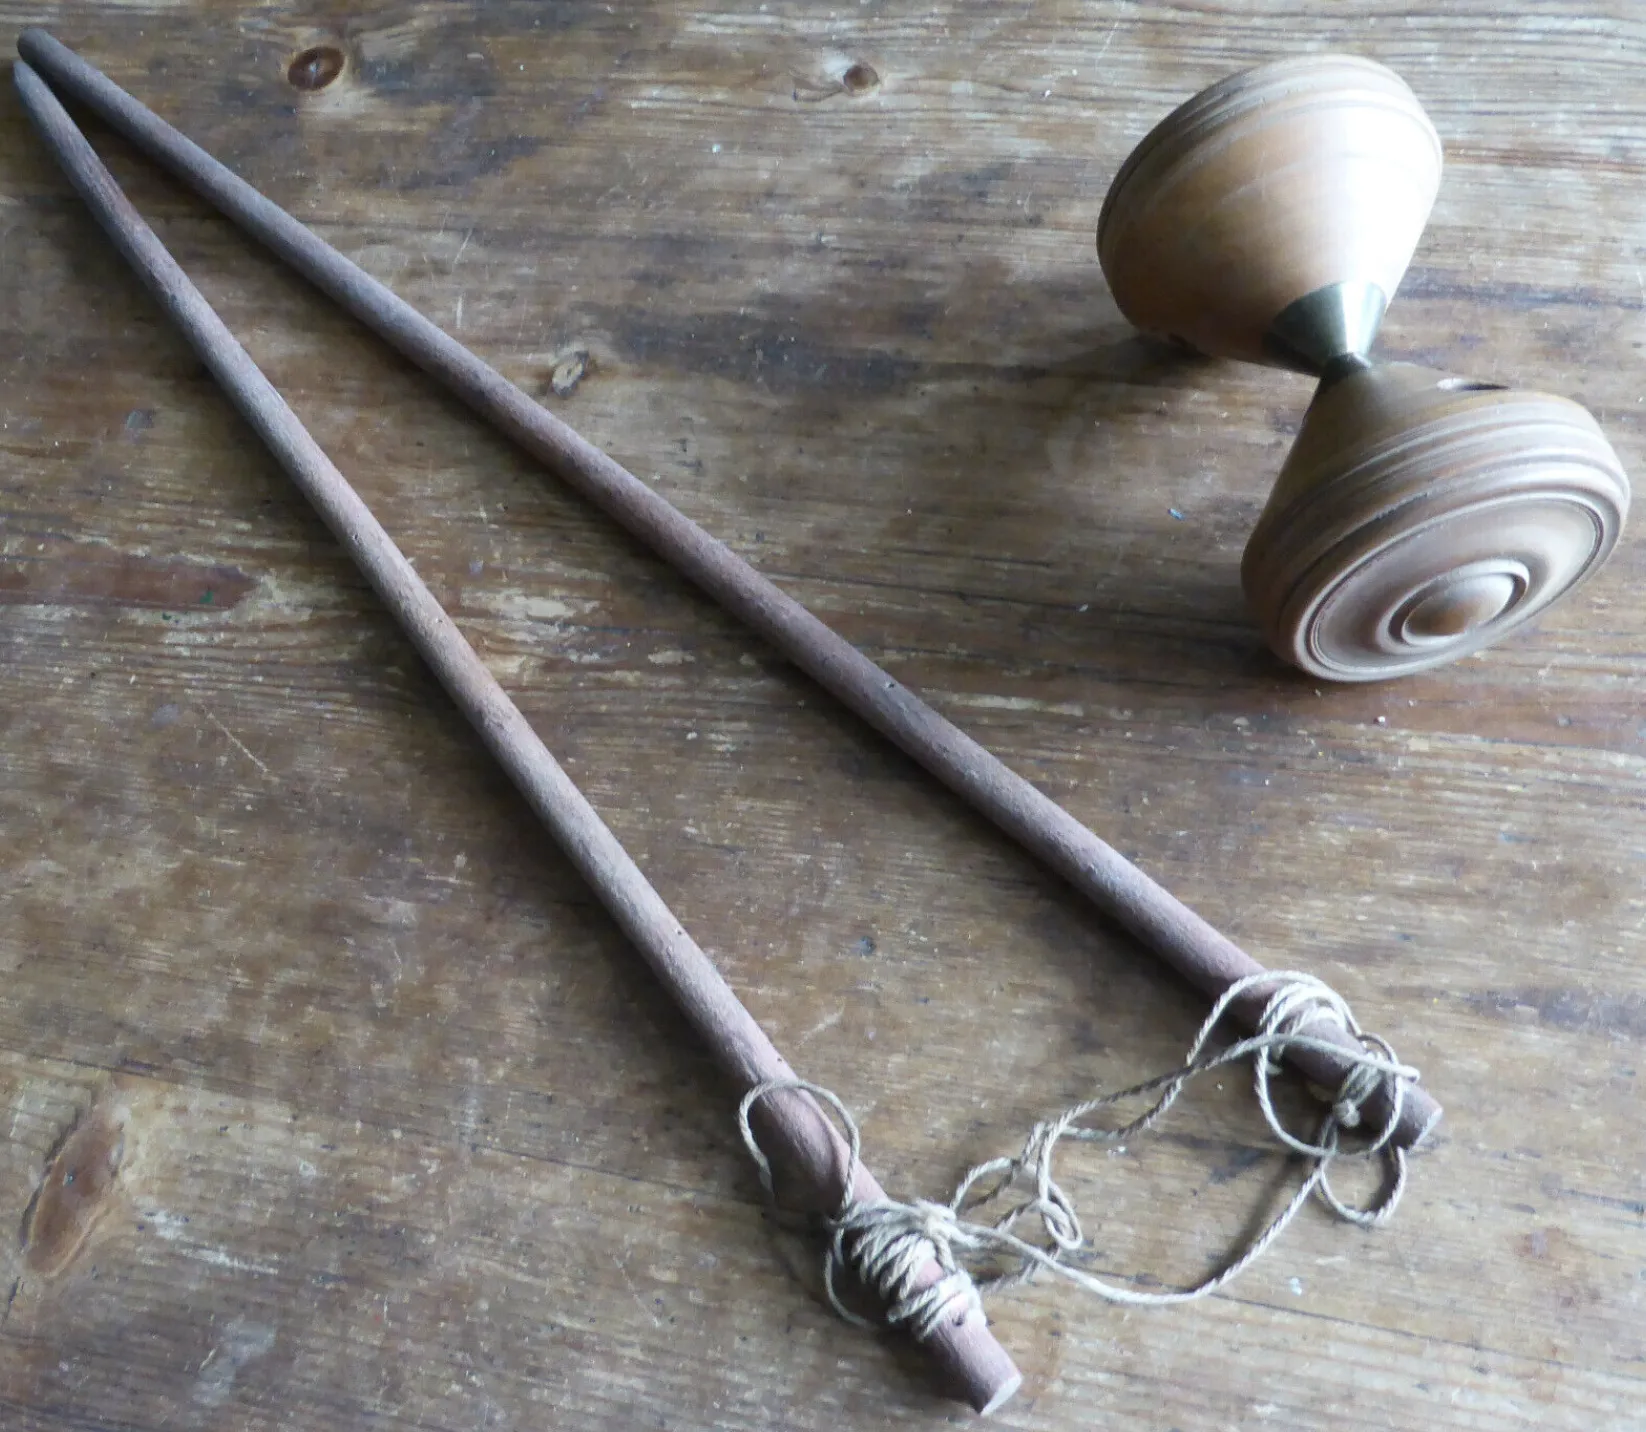 photograph of a vintage wooden diabolo toy with wooden sticks